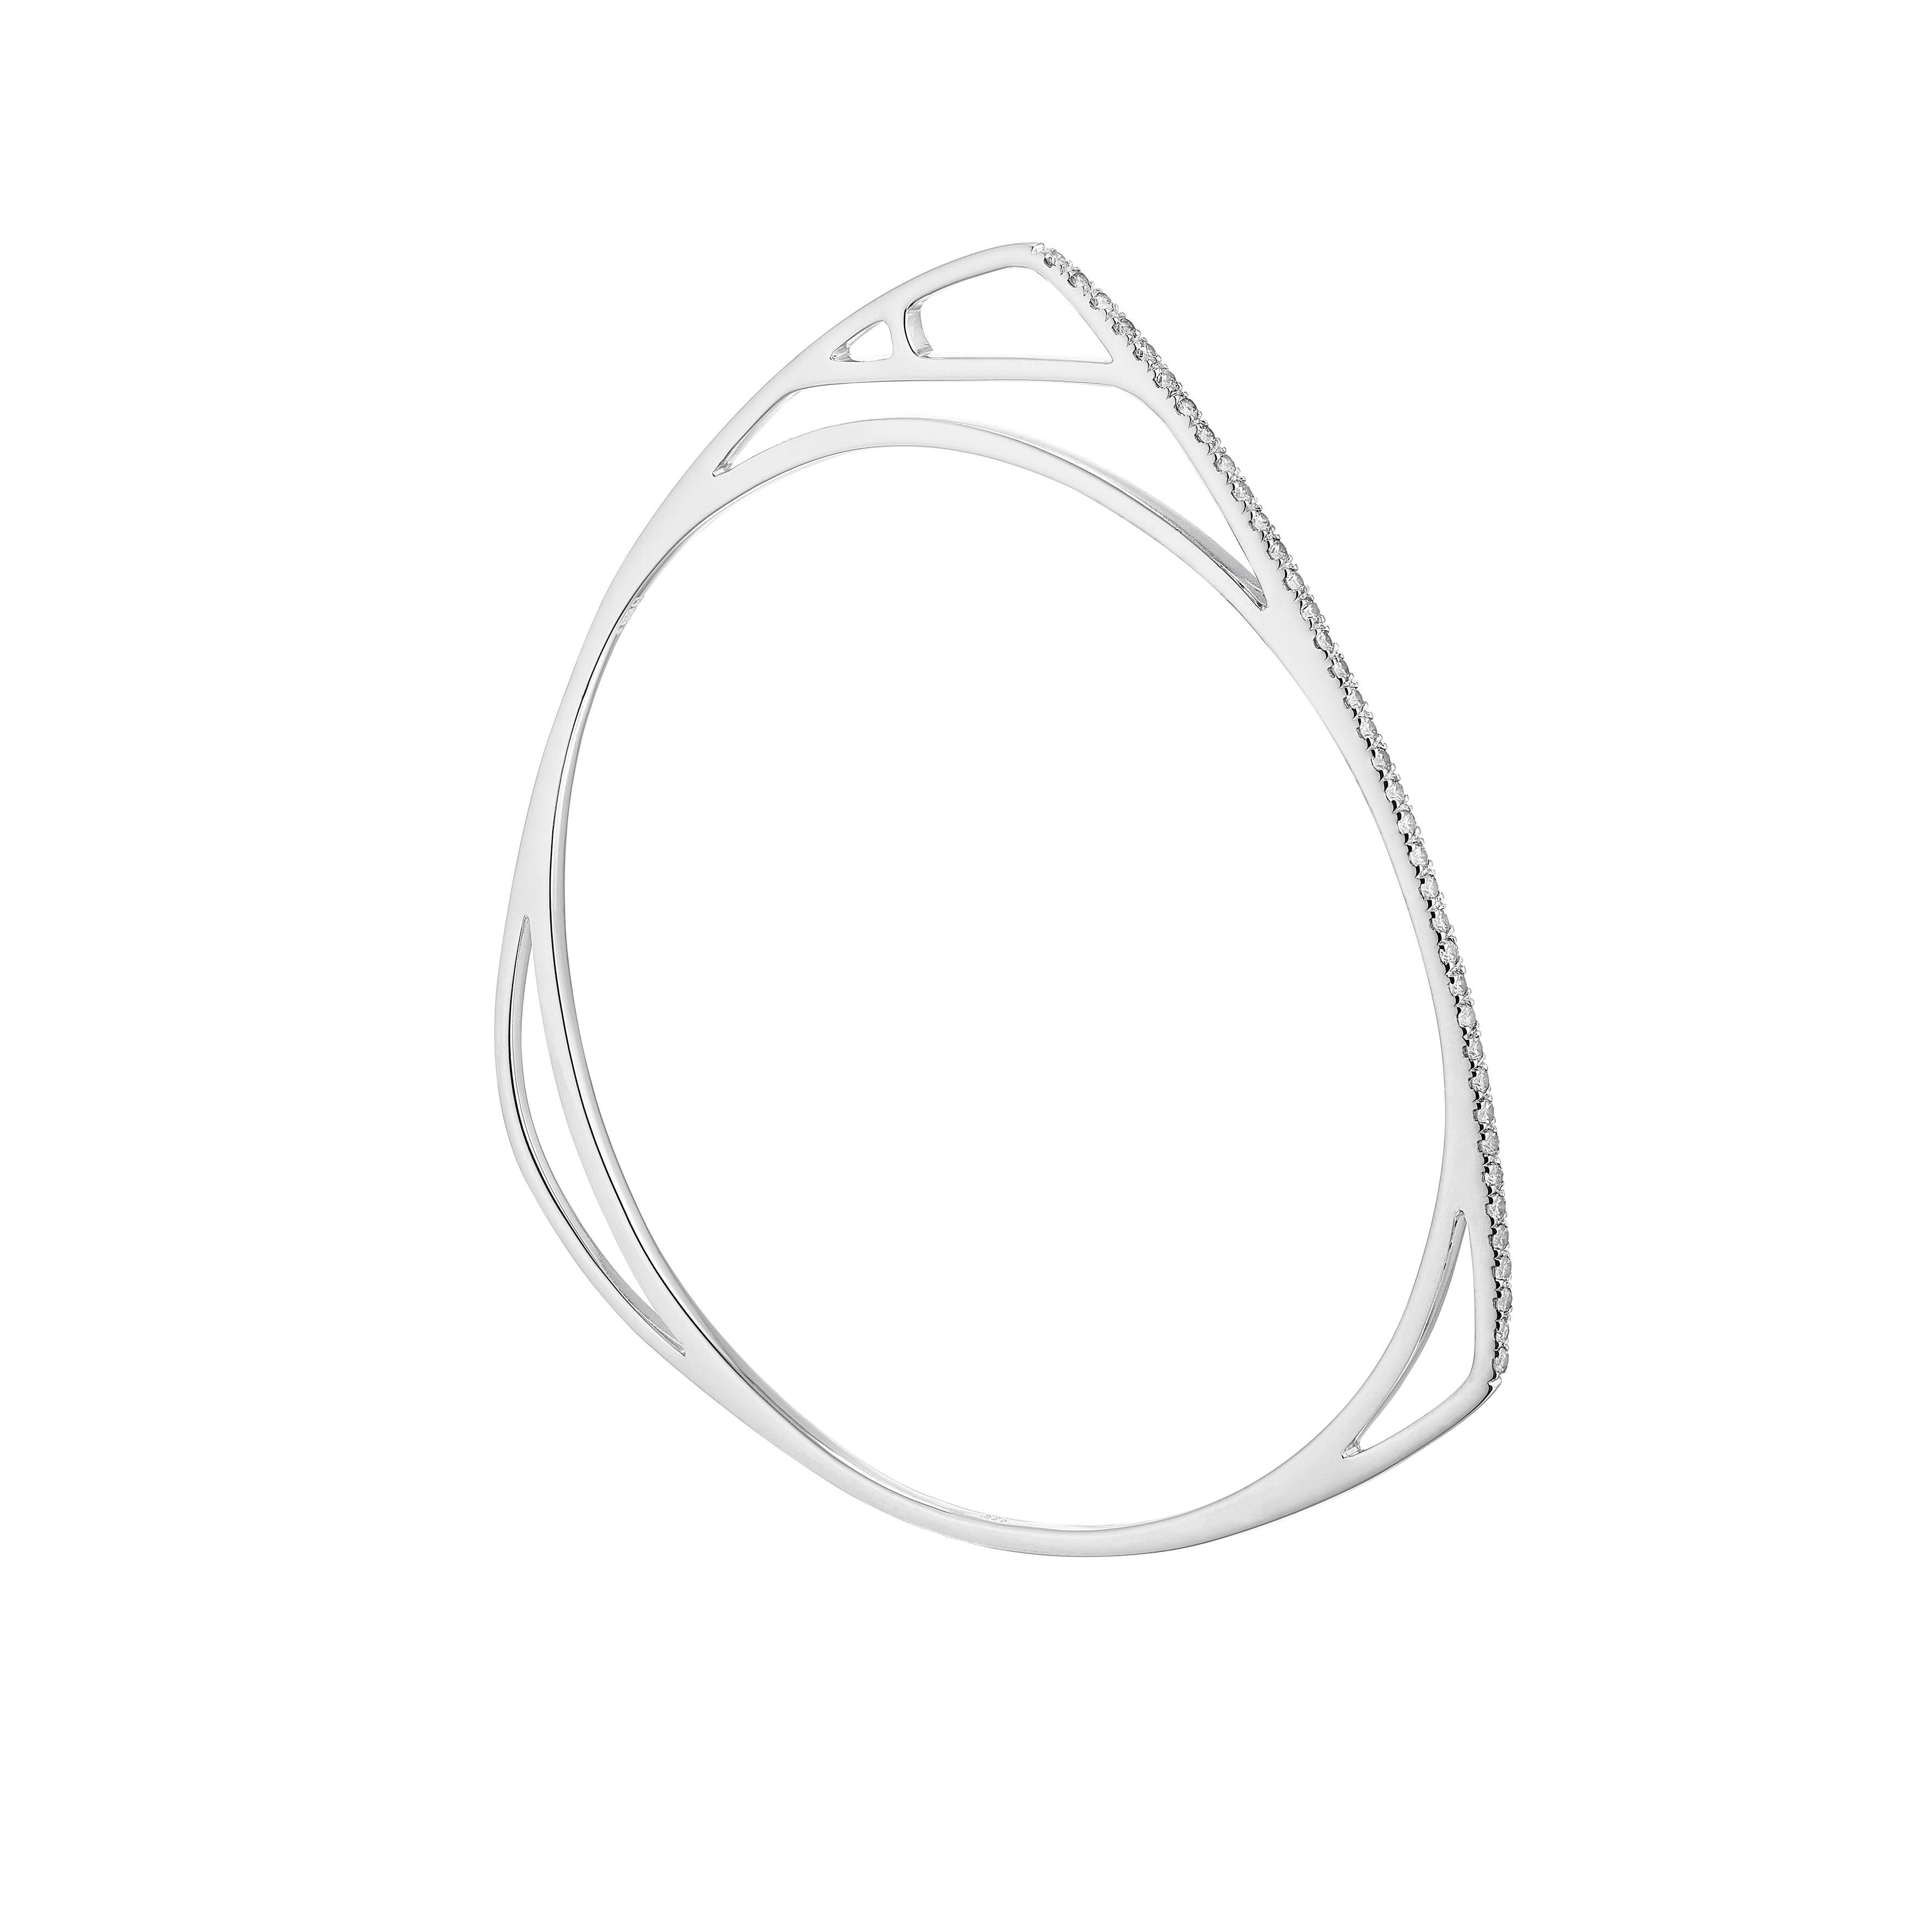 Contemporary Anabela Chan Fine Sustainable Jewelry White Gold Diamond Morpho Bangle 5 Size S For Sale